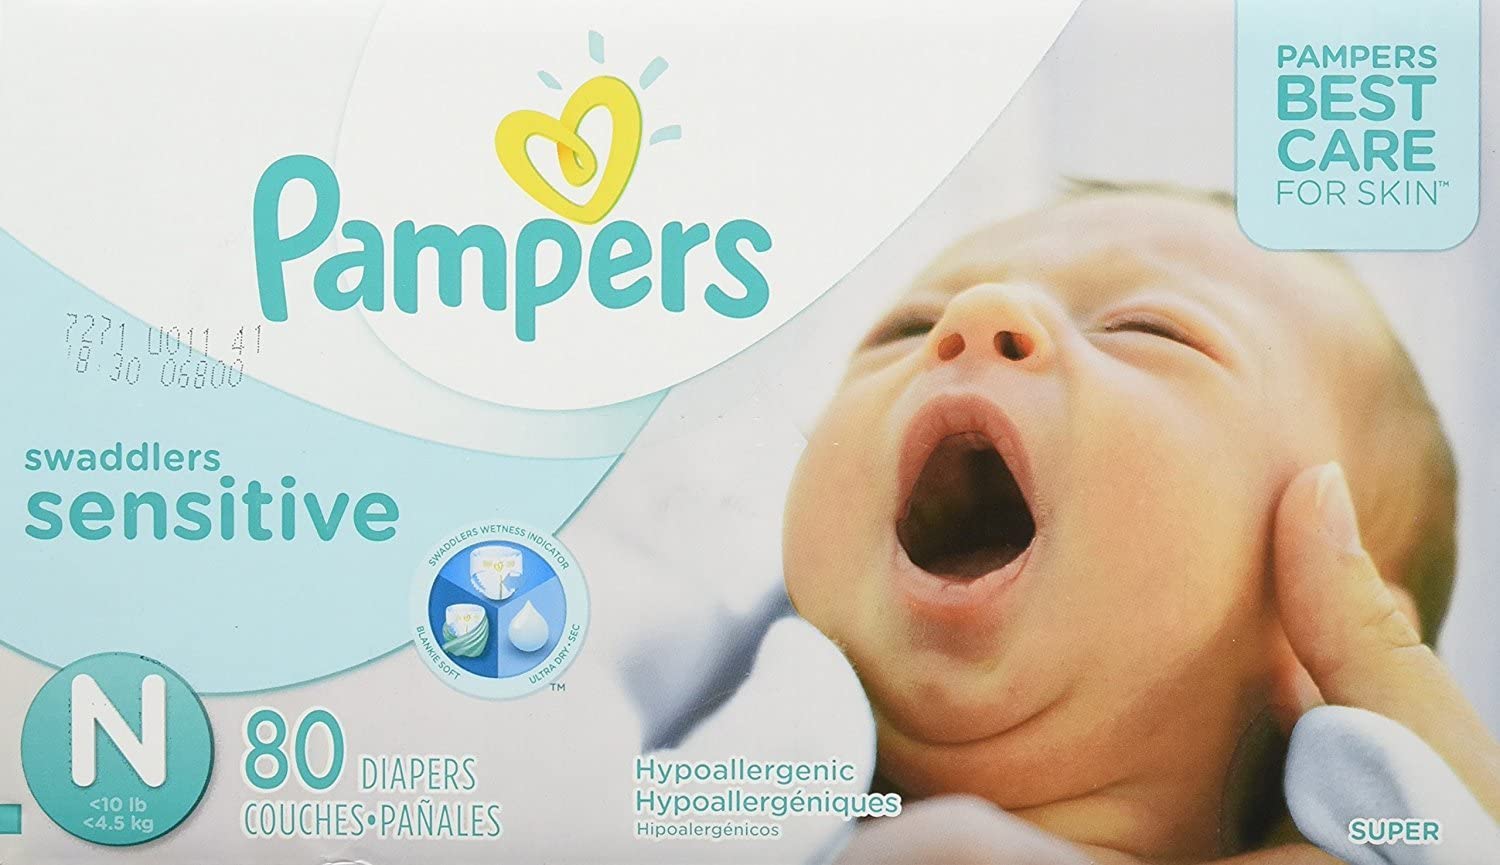 Diapers Newborn/Size 0 (< 10 lb), 80 Count - Pampers Swaddlers Sensitive Disposable Baby Diapers, Super Pack